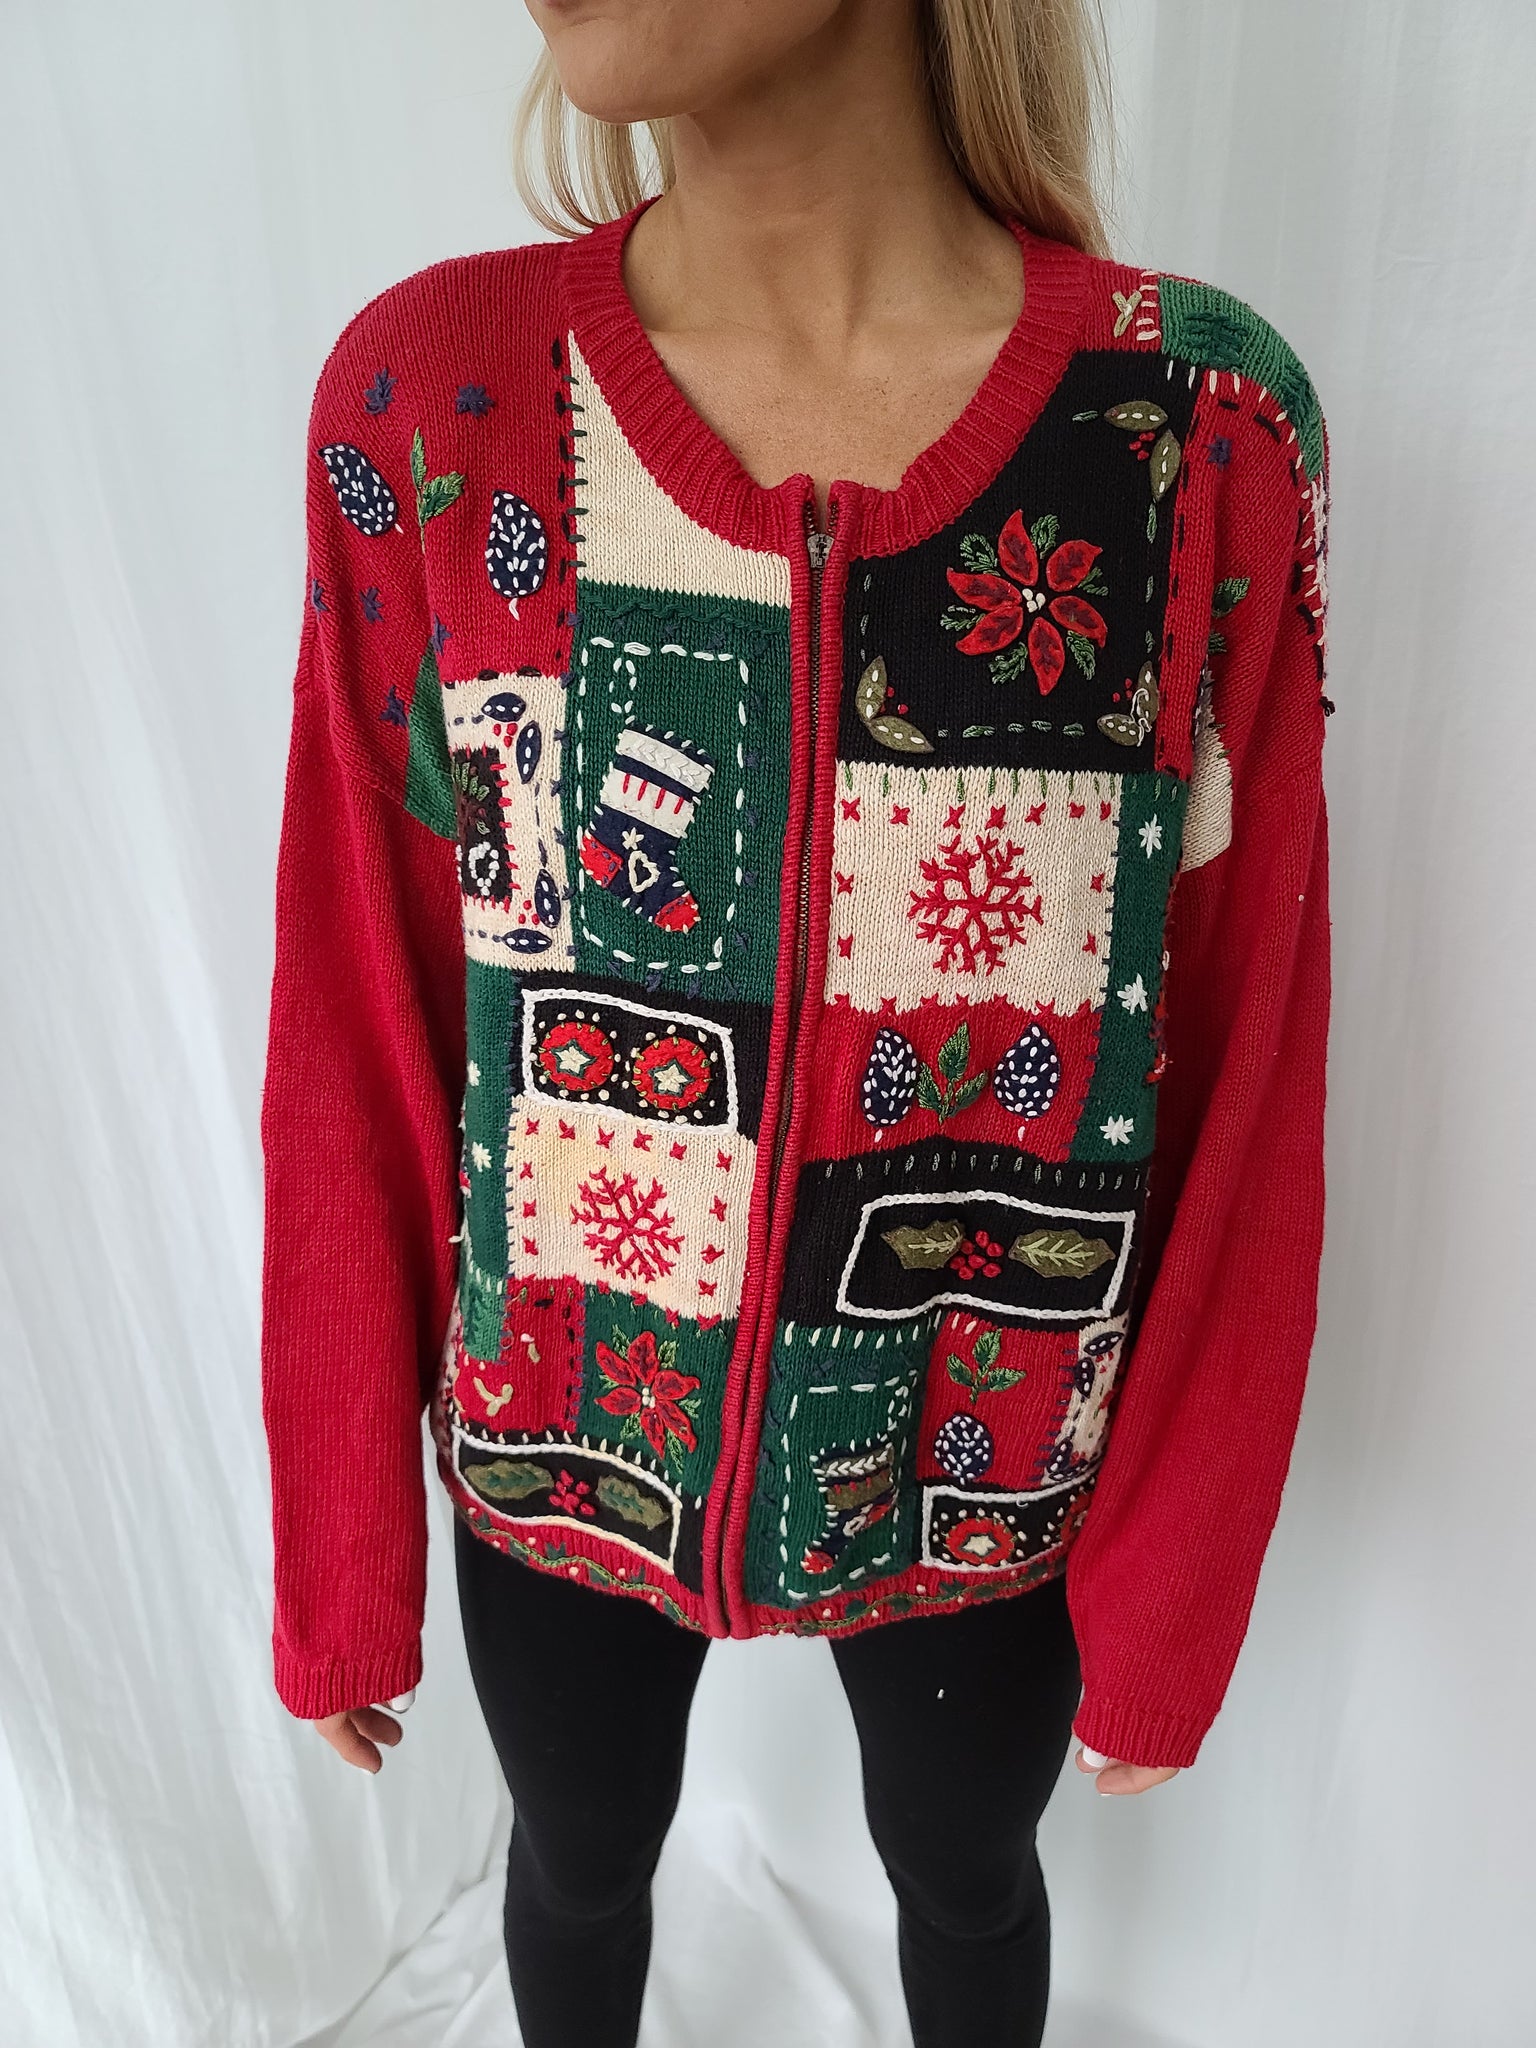 Quilt-Like Vintage 2000 Patchwork Zip up Christmas Sweater